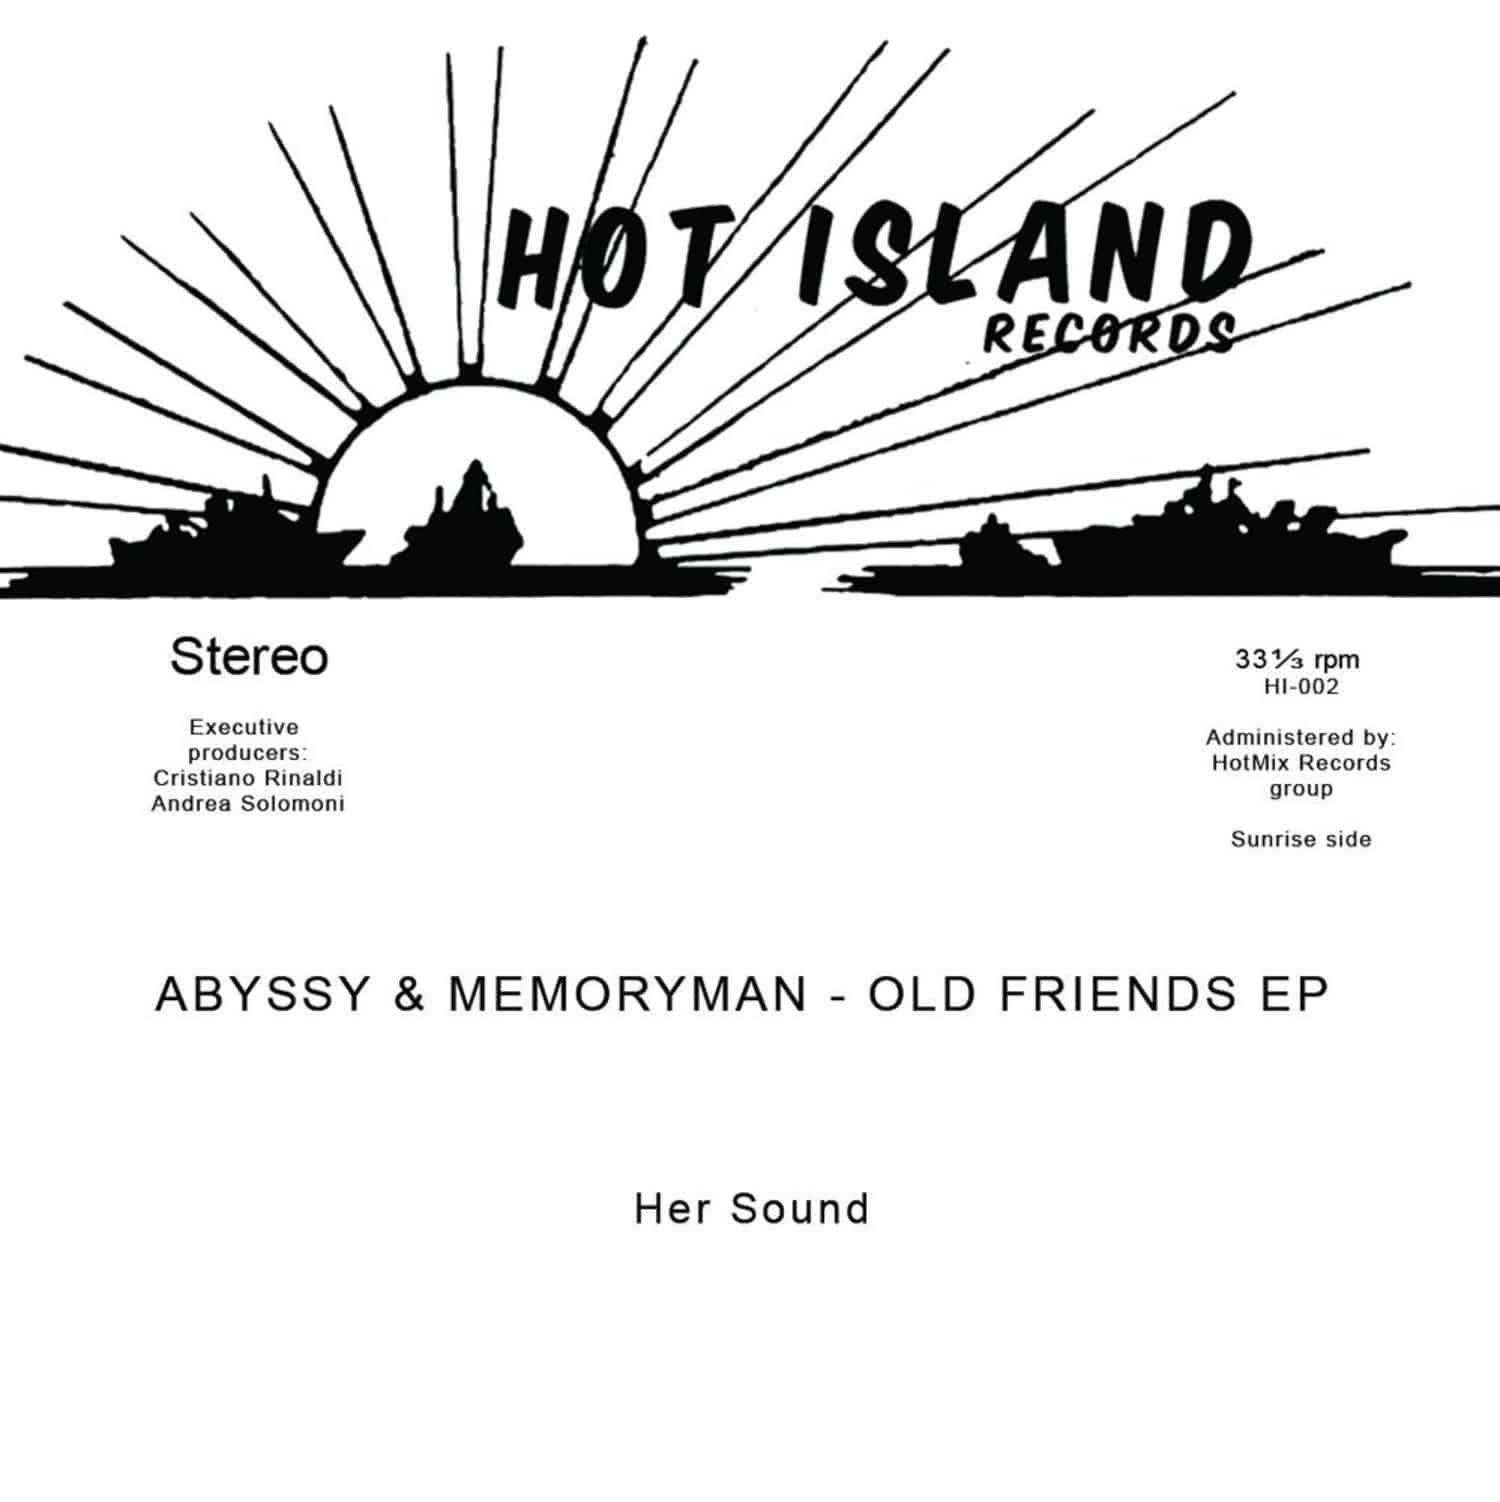 Abyssy & Memoryman - OLD FRIENDS EP